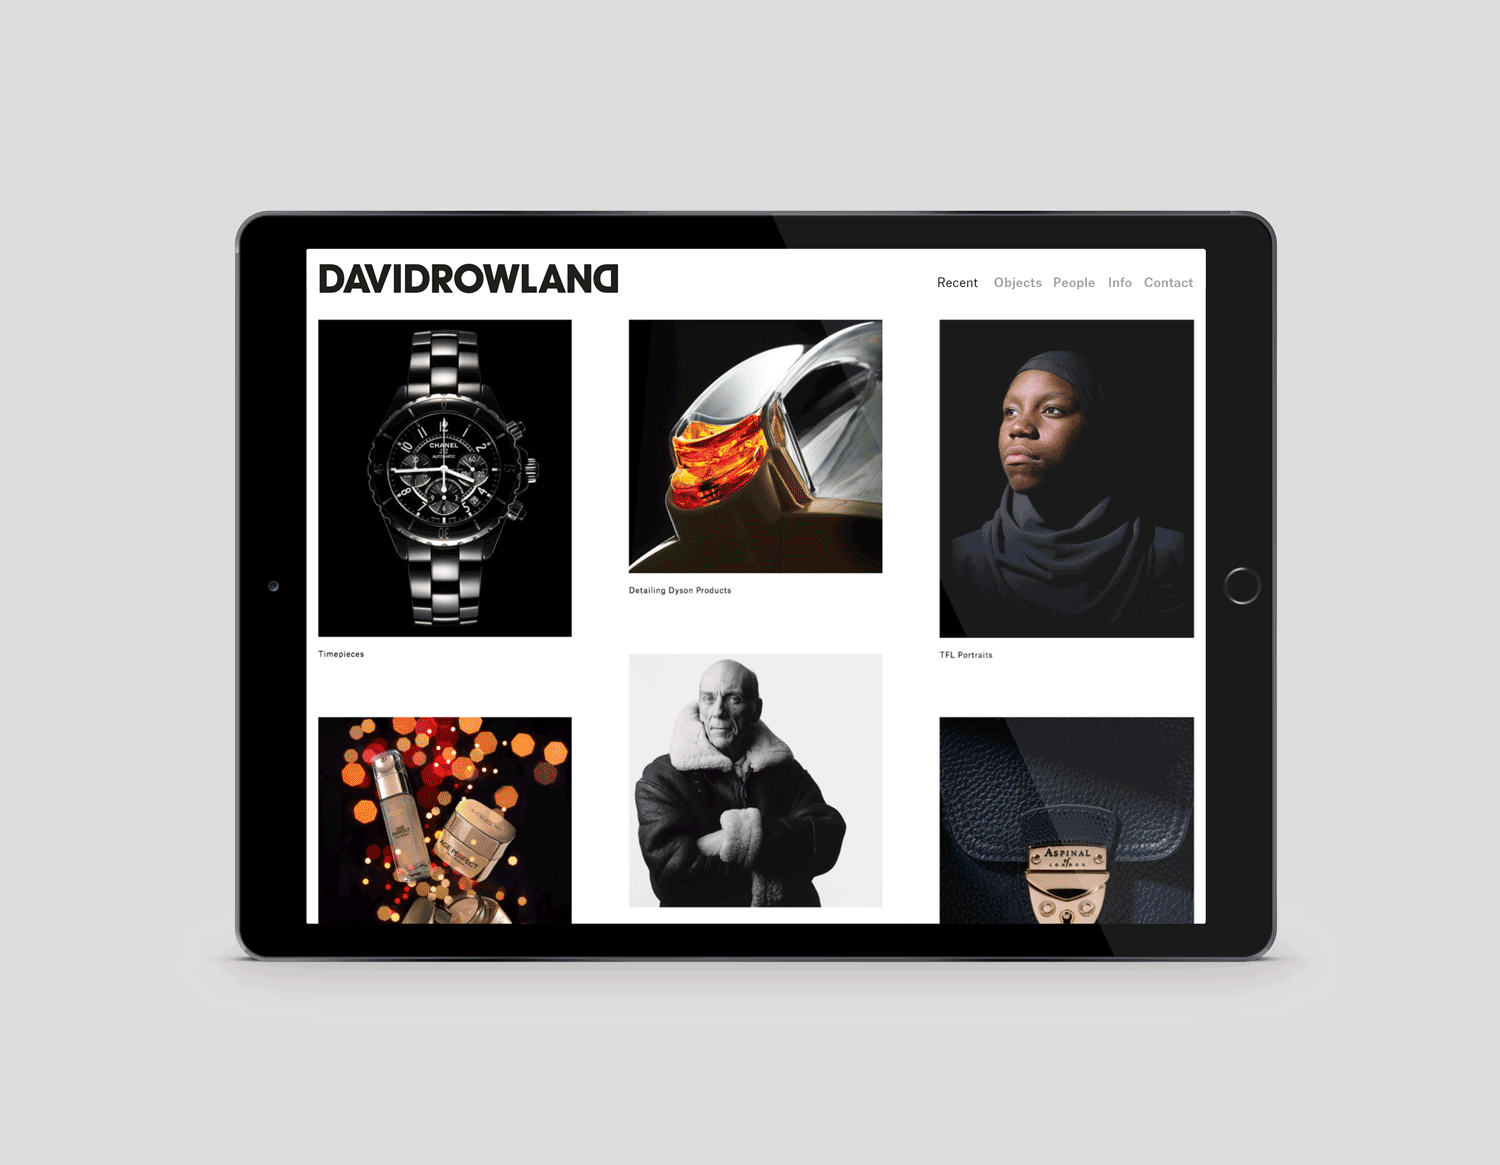 Brand identity and responsive website by London-based graphic design studio ico Design for photographer David Rowland